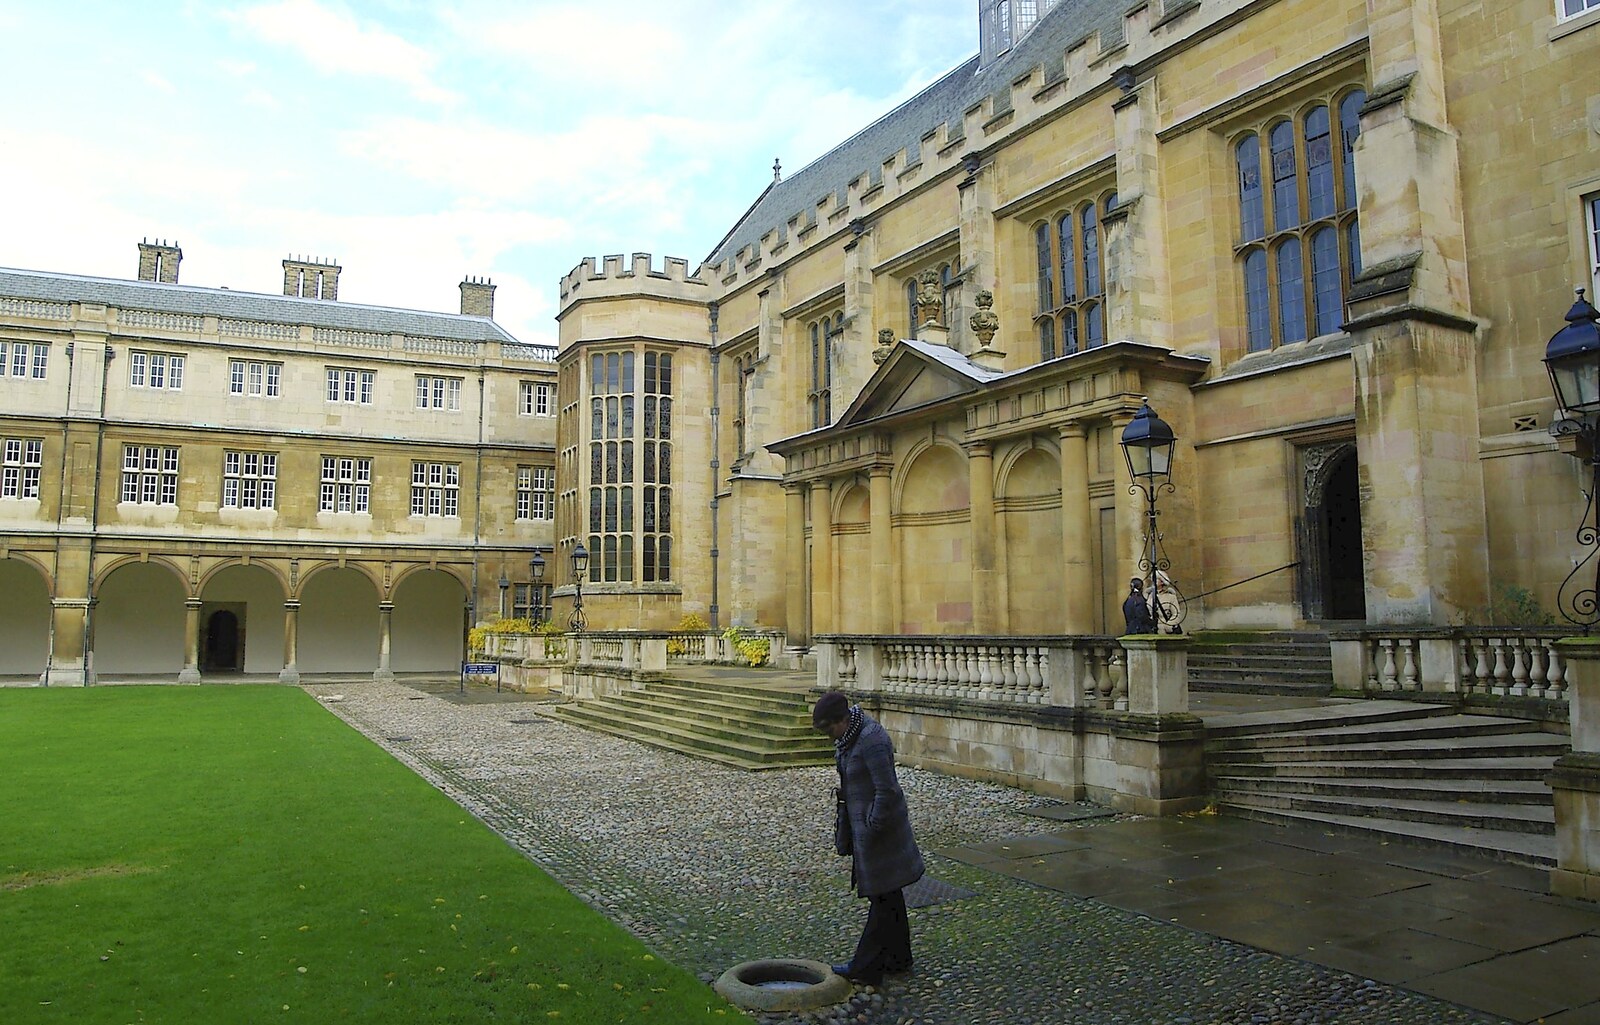 Isobel peers at a pool of water from Autumn Colleges: a Wander around The Backs, Cambridge - 26th November